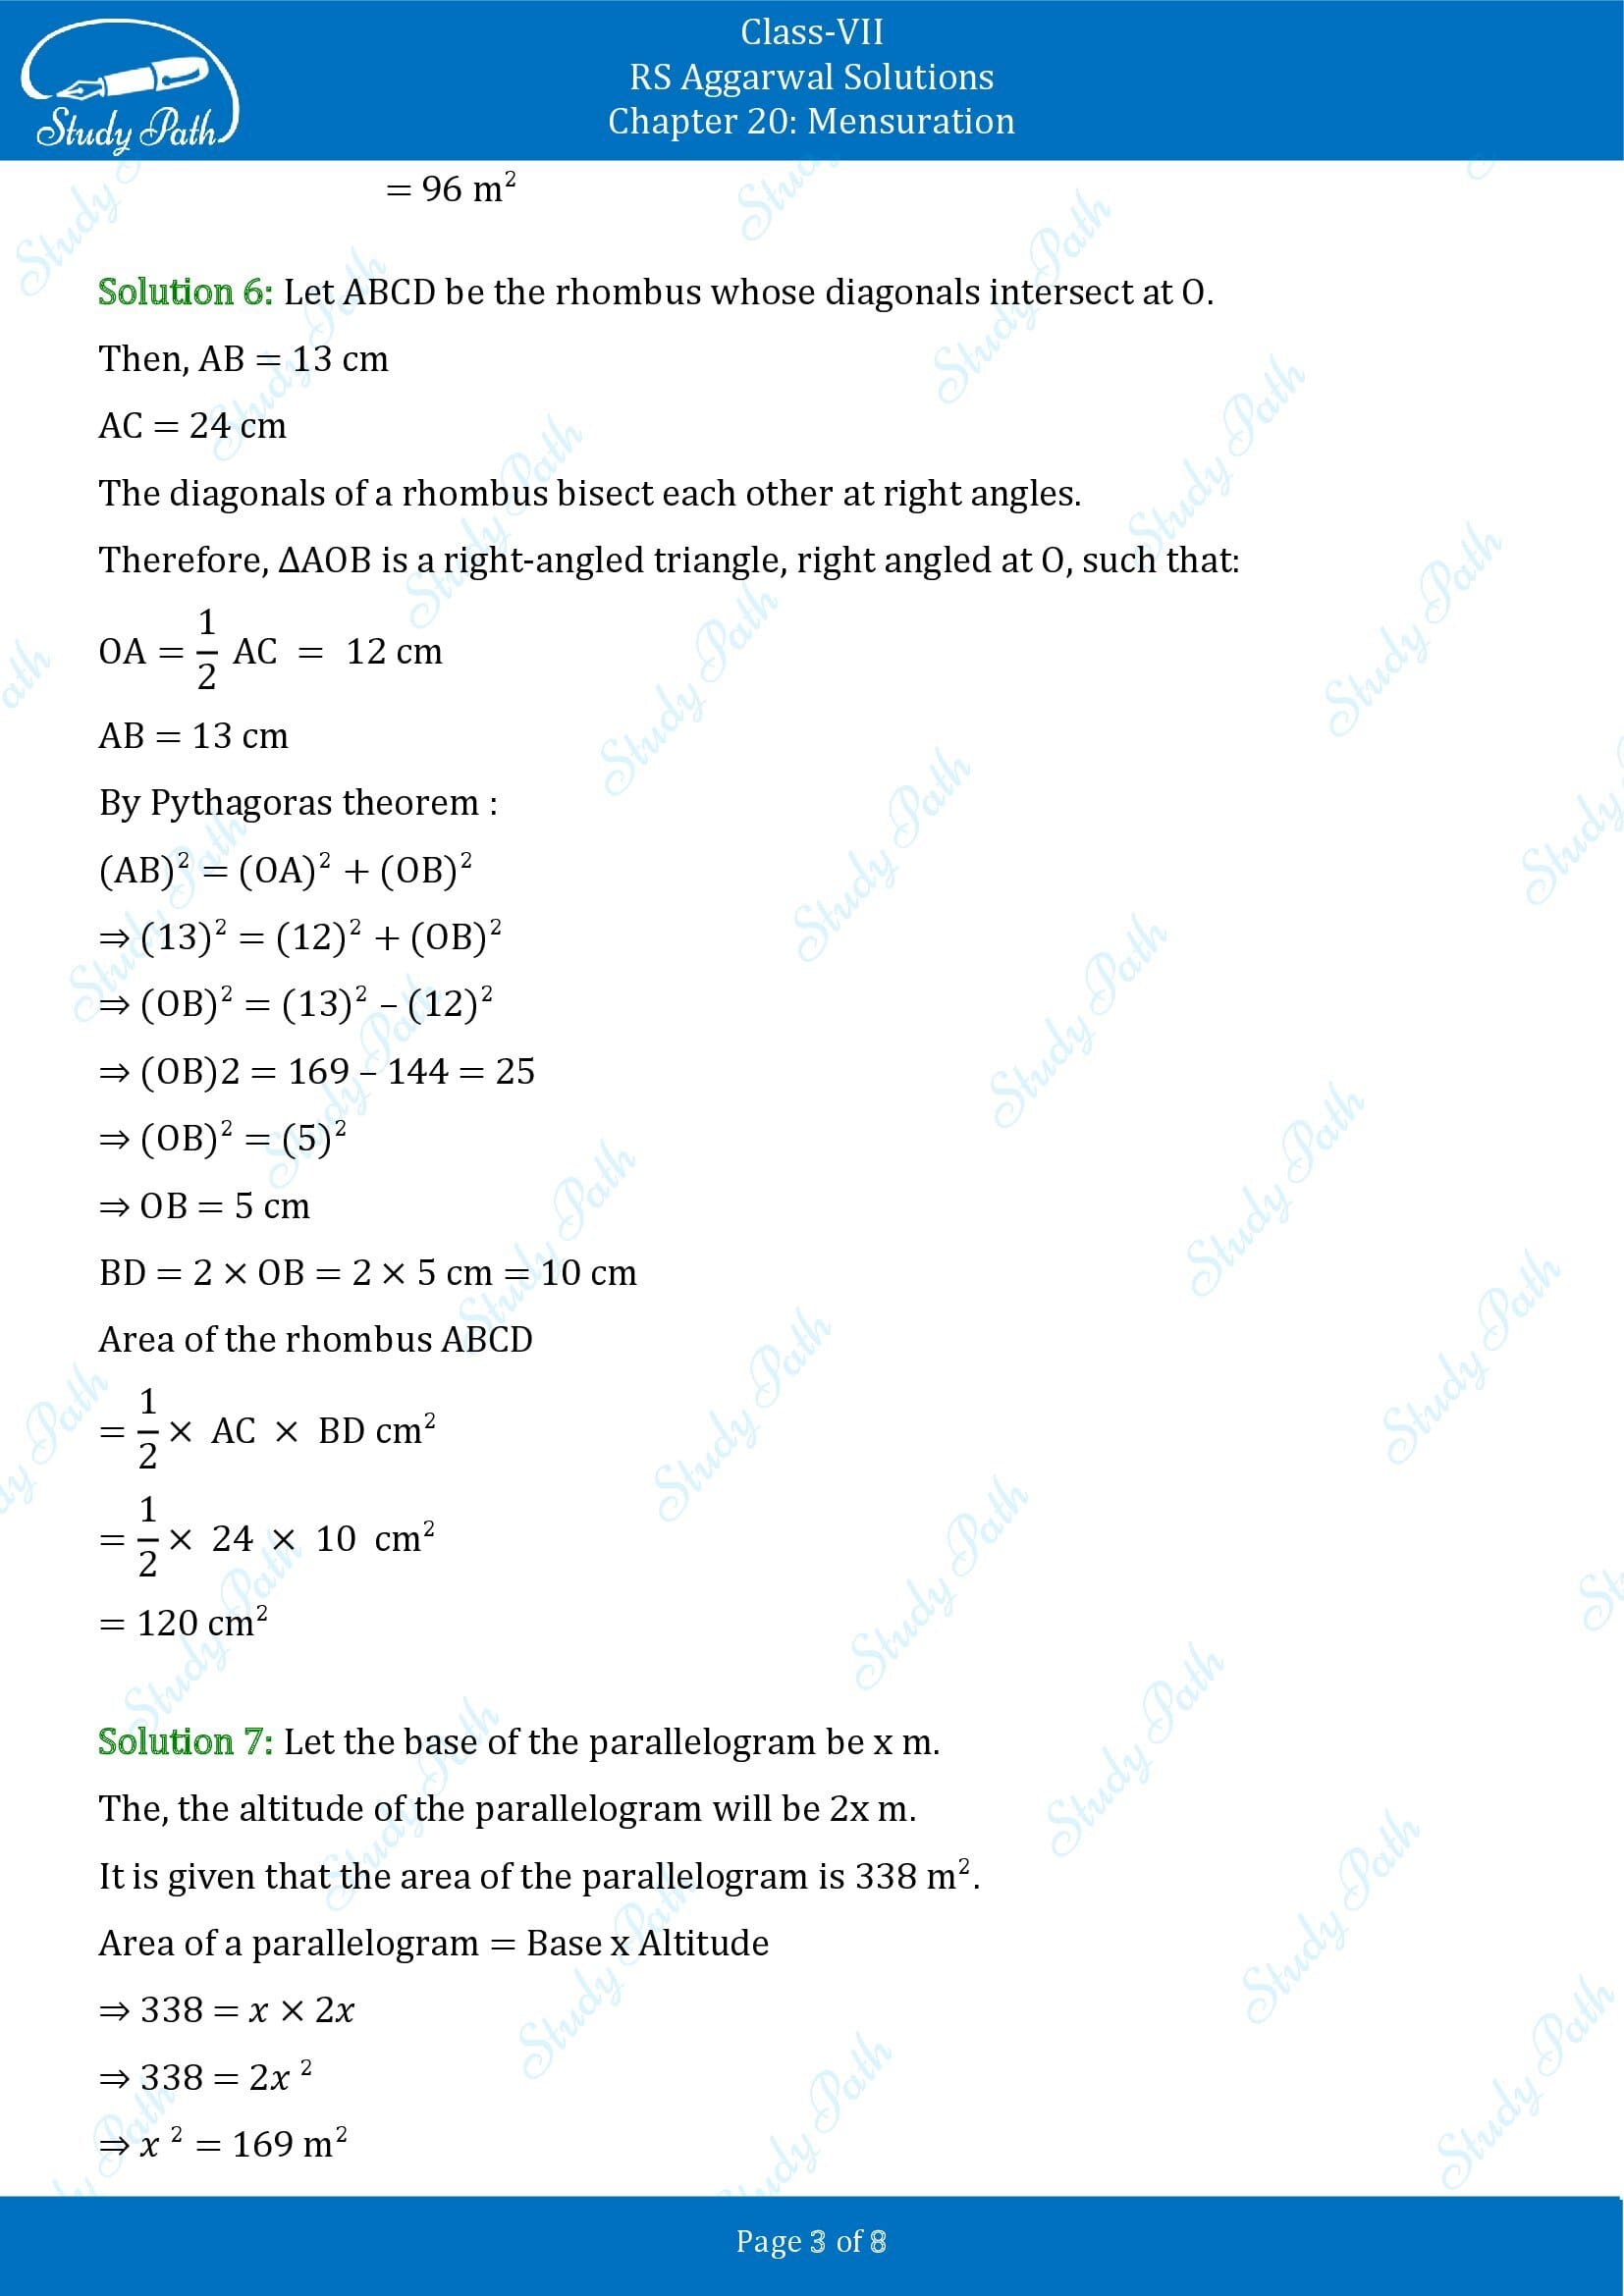 RS Aggarwal Solutions Class 7 Chapter 20 Mensuration Test Paper 20 0003